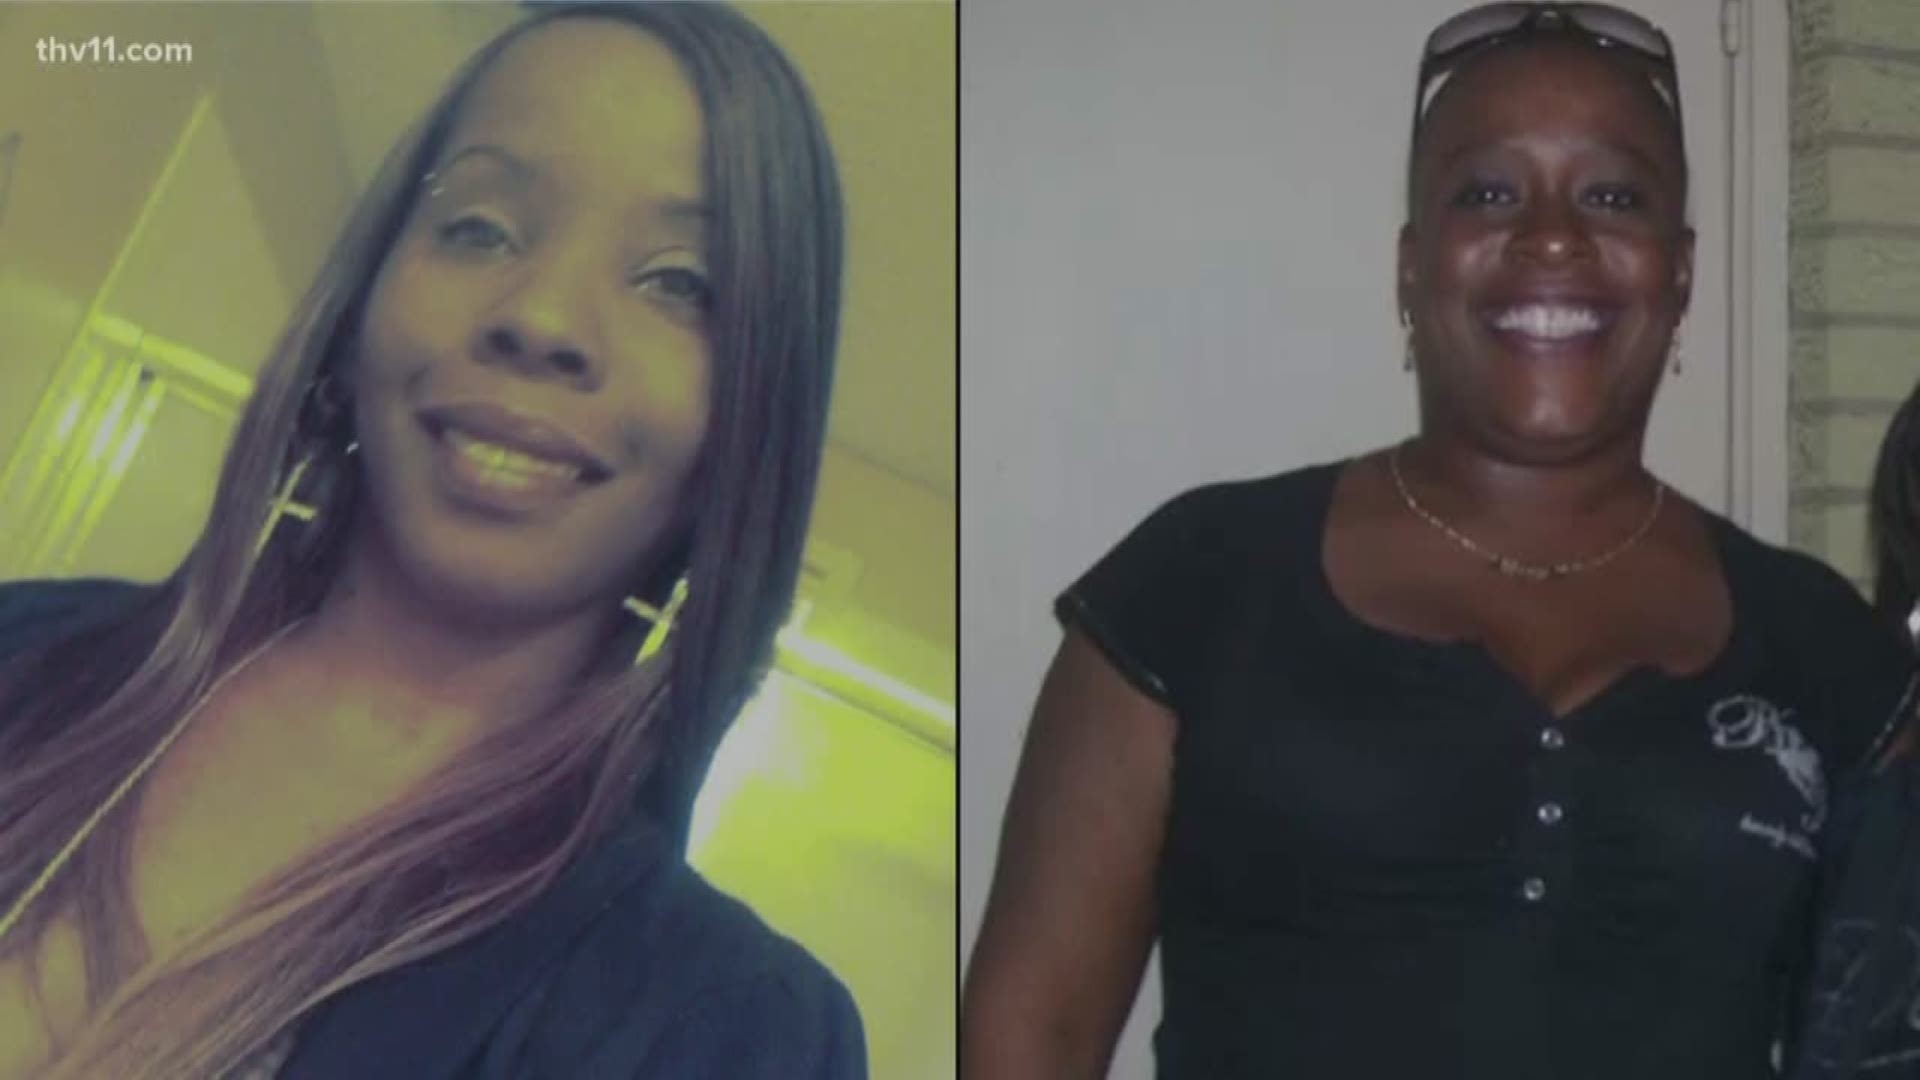 Both Shequenia Burnett and Terkessa Wallace were reported missing around the same time in 2014 and only a leg has been found since then.